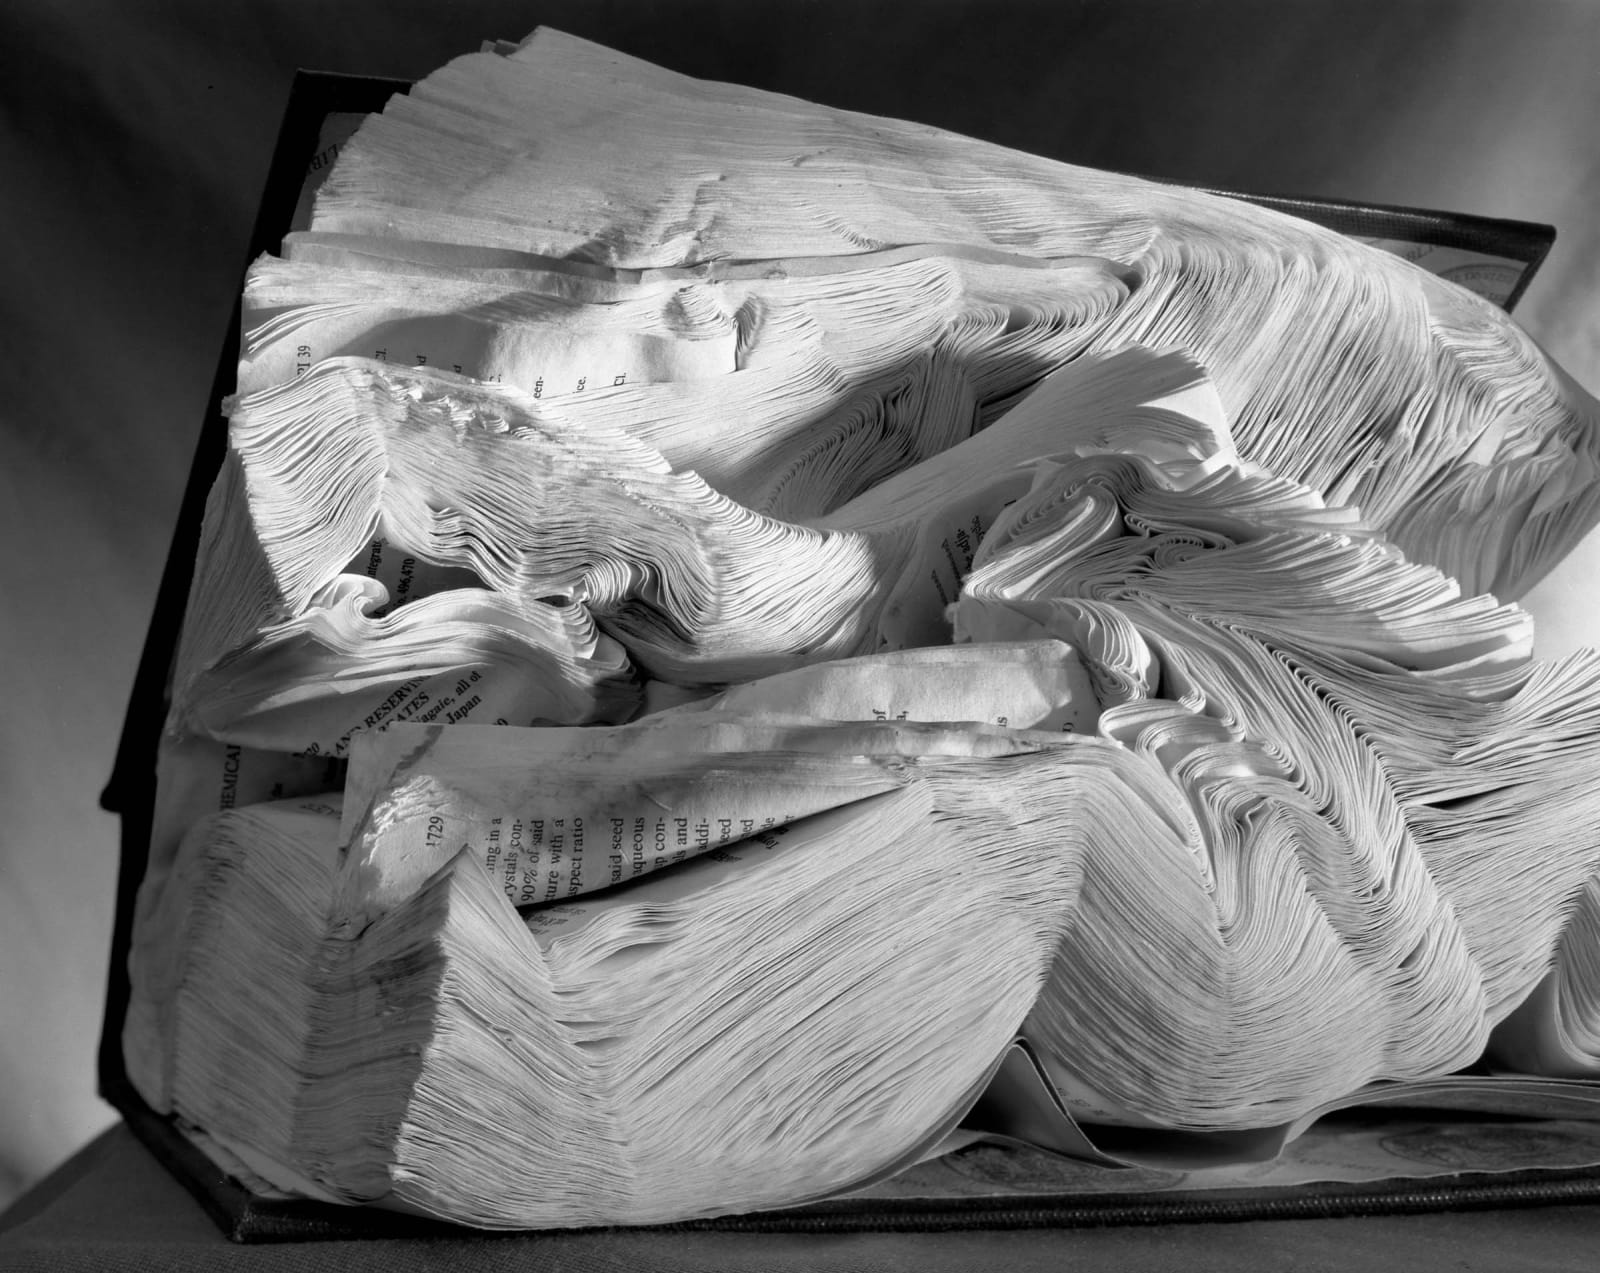 Abelardo Morell Books Book Damaged by Water book with wavy pages in black and white